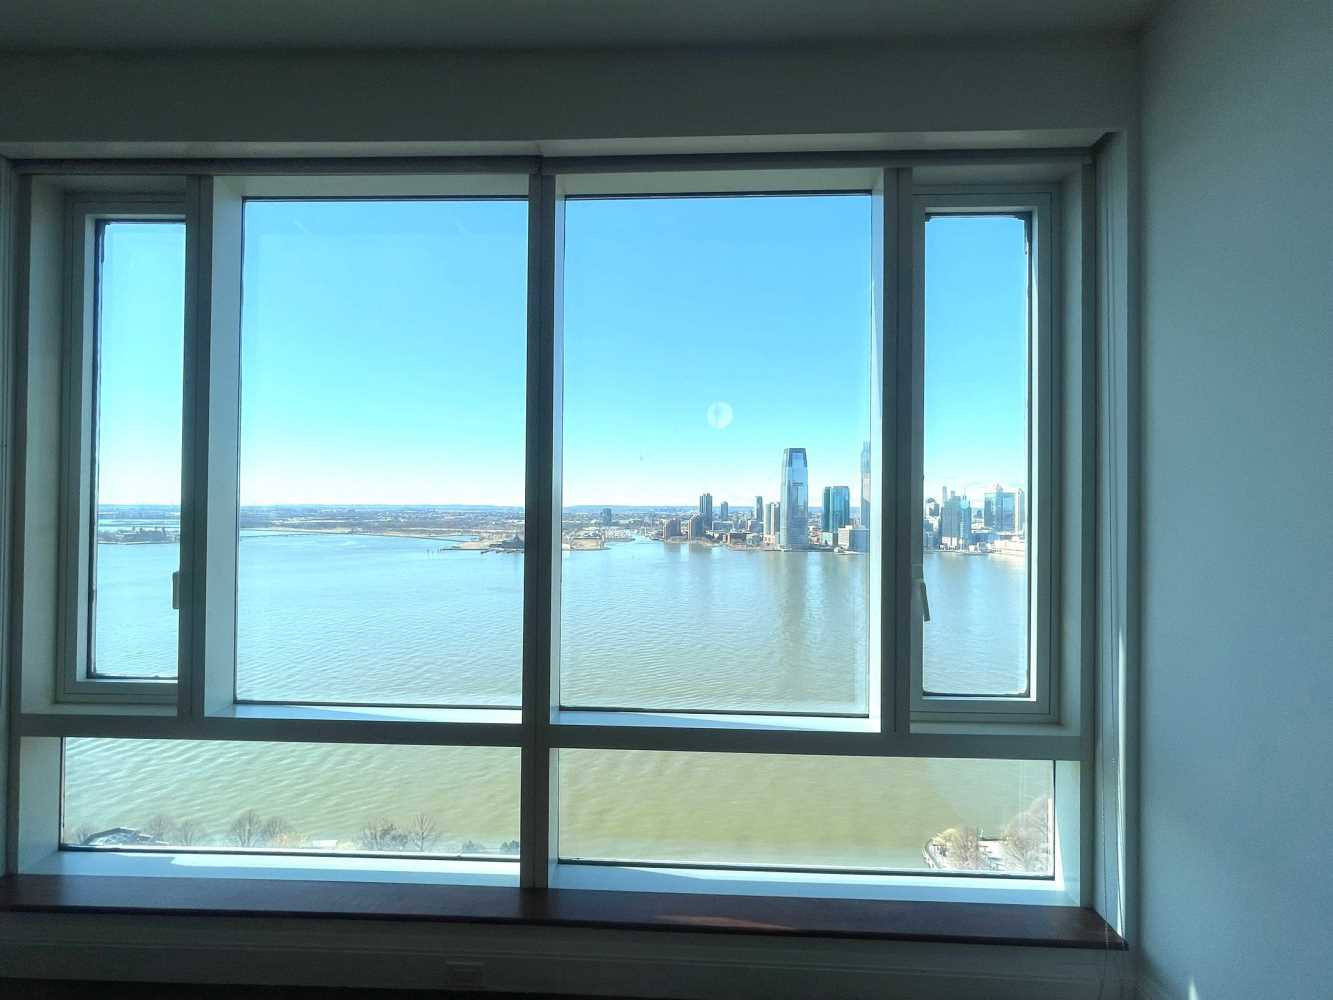 70 Little West Street 31C, Battery Park City, Downtown, NYC - 2 Bedrooms  
2 Bathrooms  
4 Rooms - 